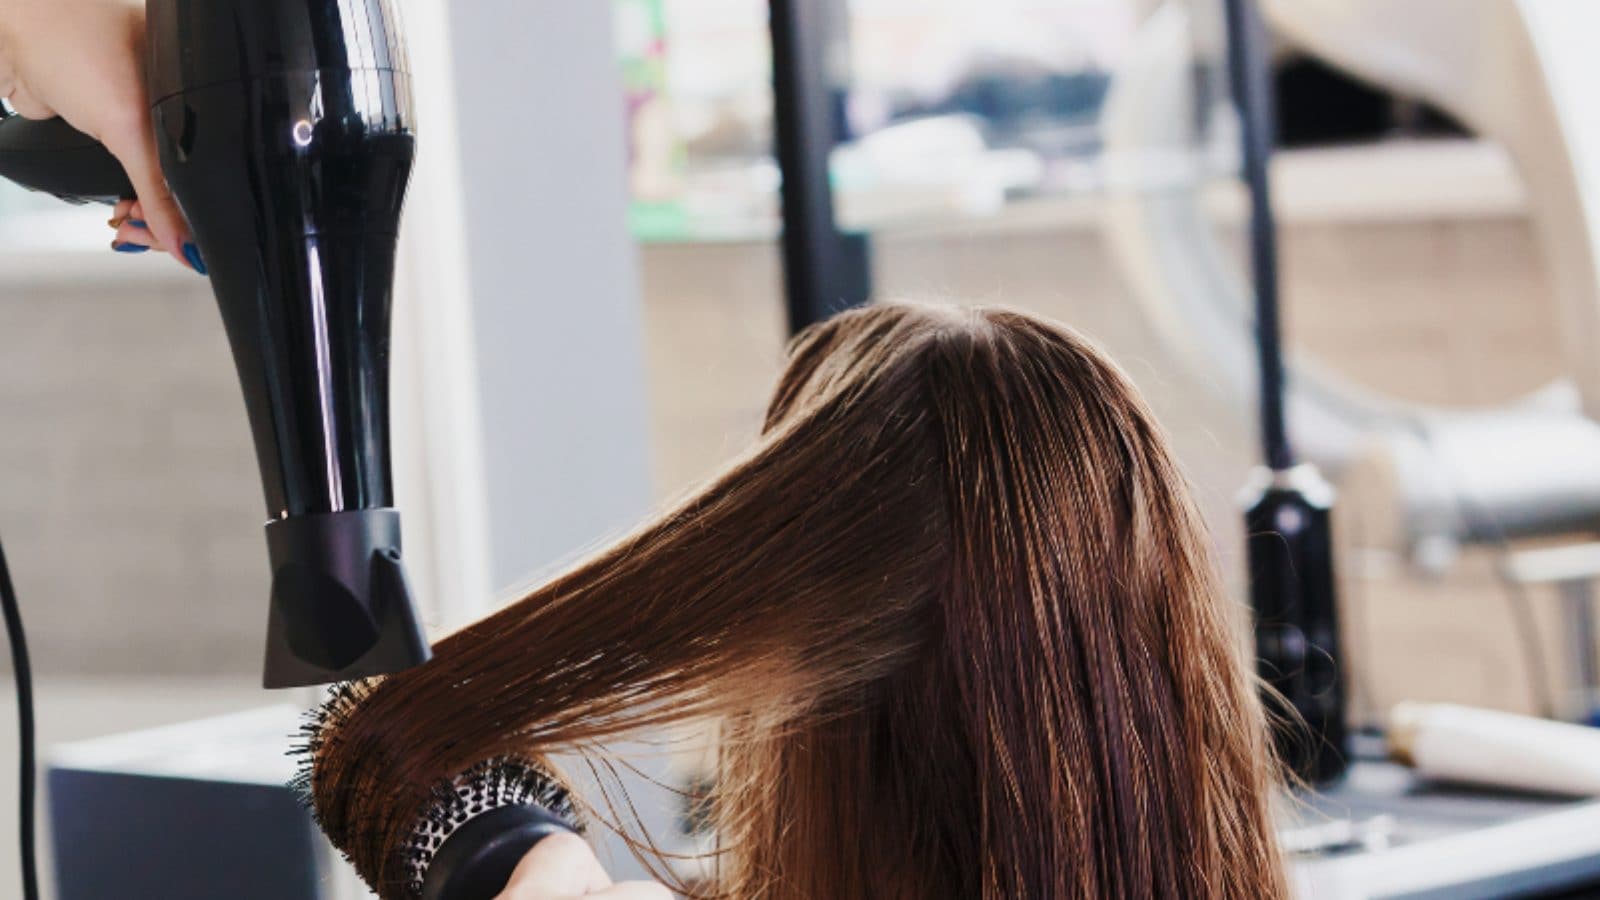 Hair Damaged Due To Excessive Heat? Follow These Tips To Repair It